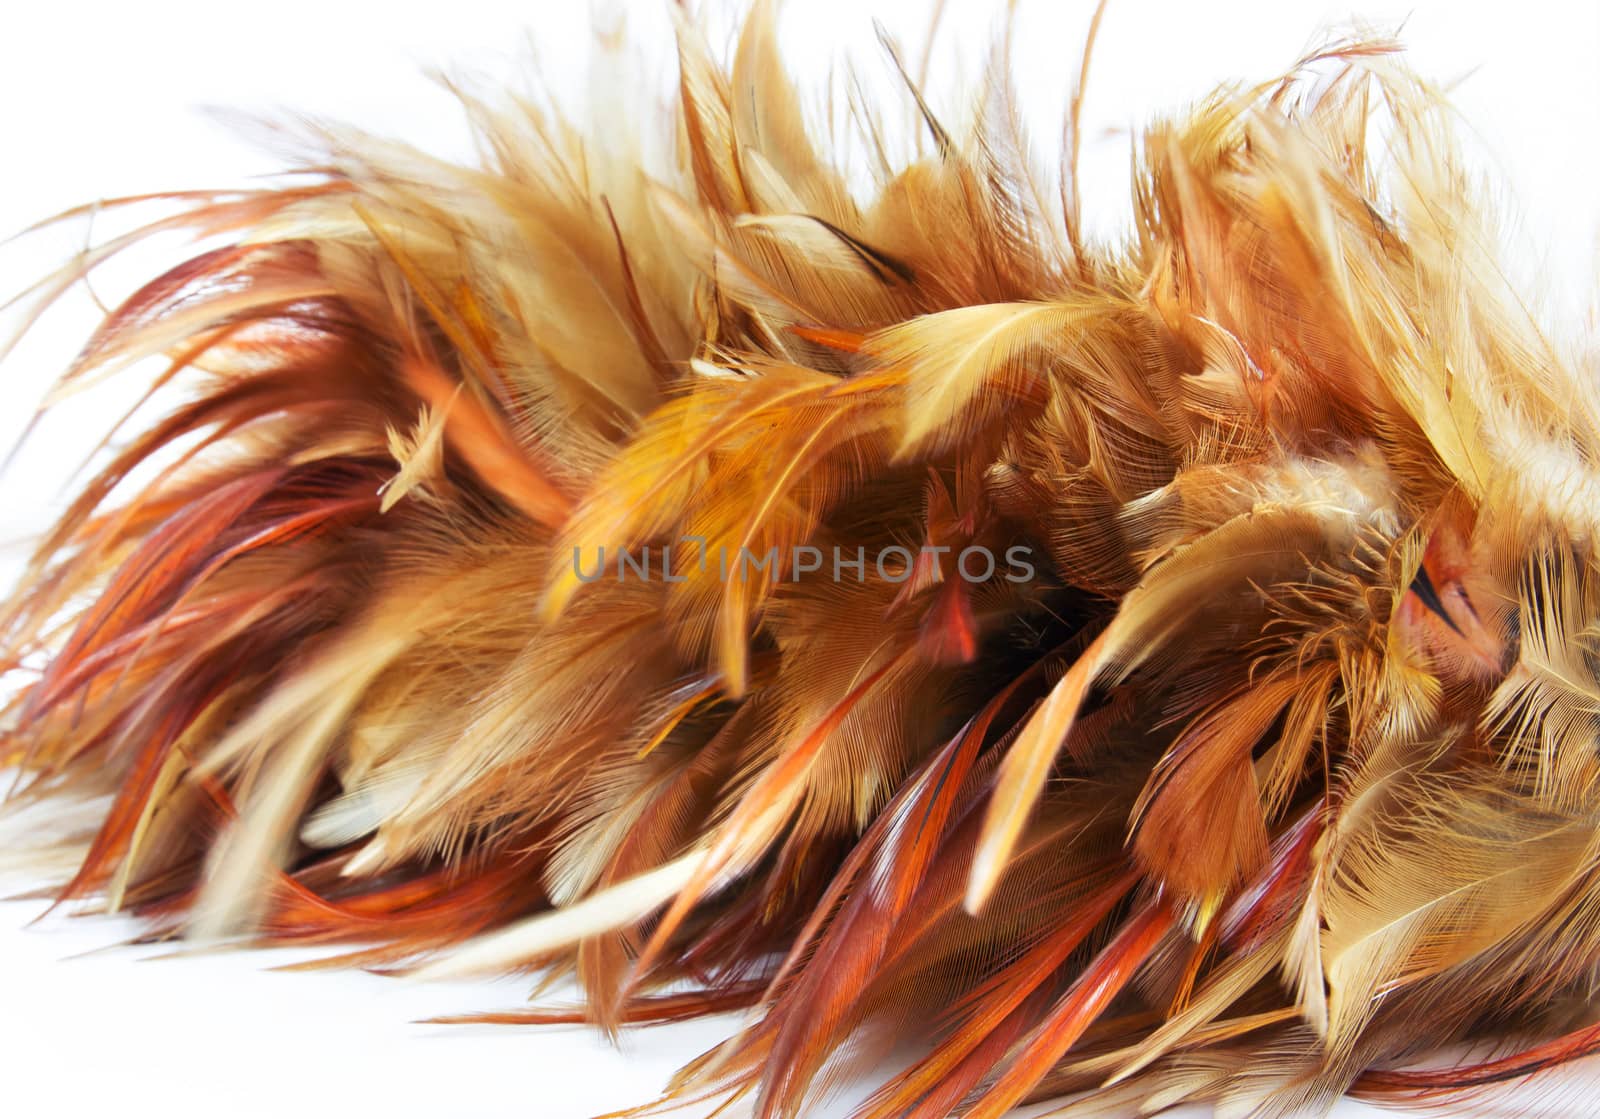 Feather duster on white background by sutipp11